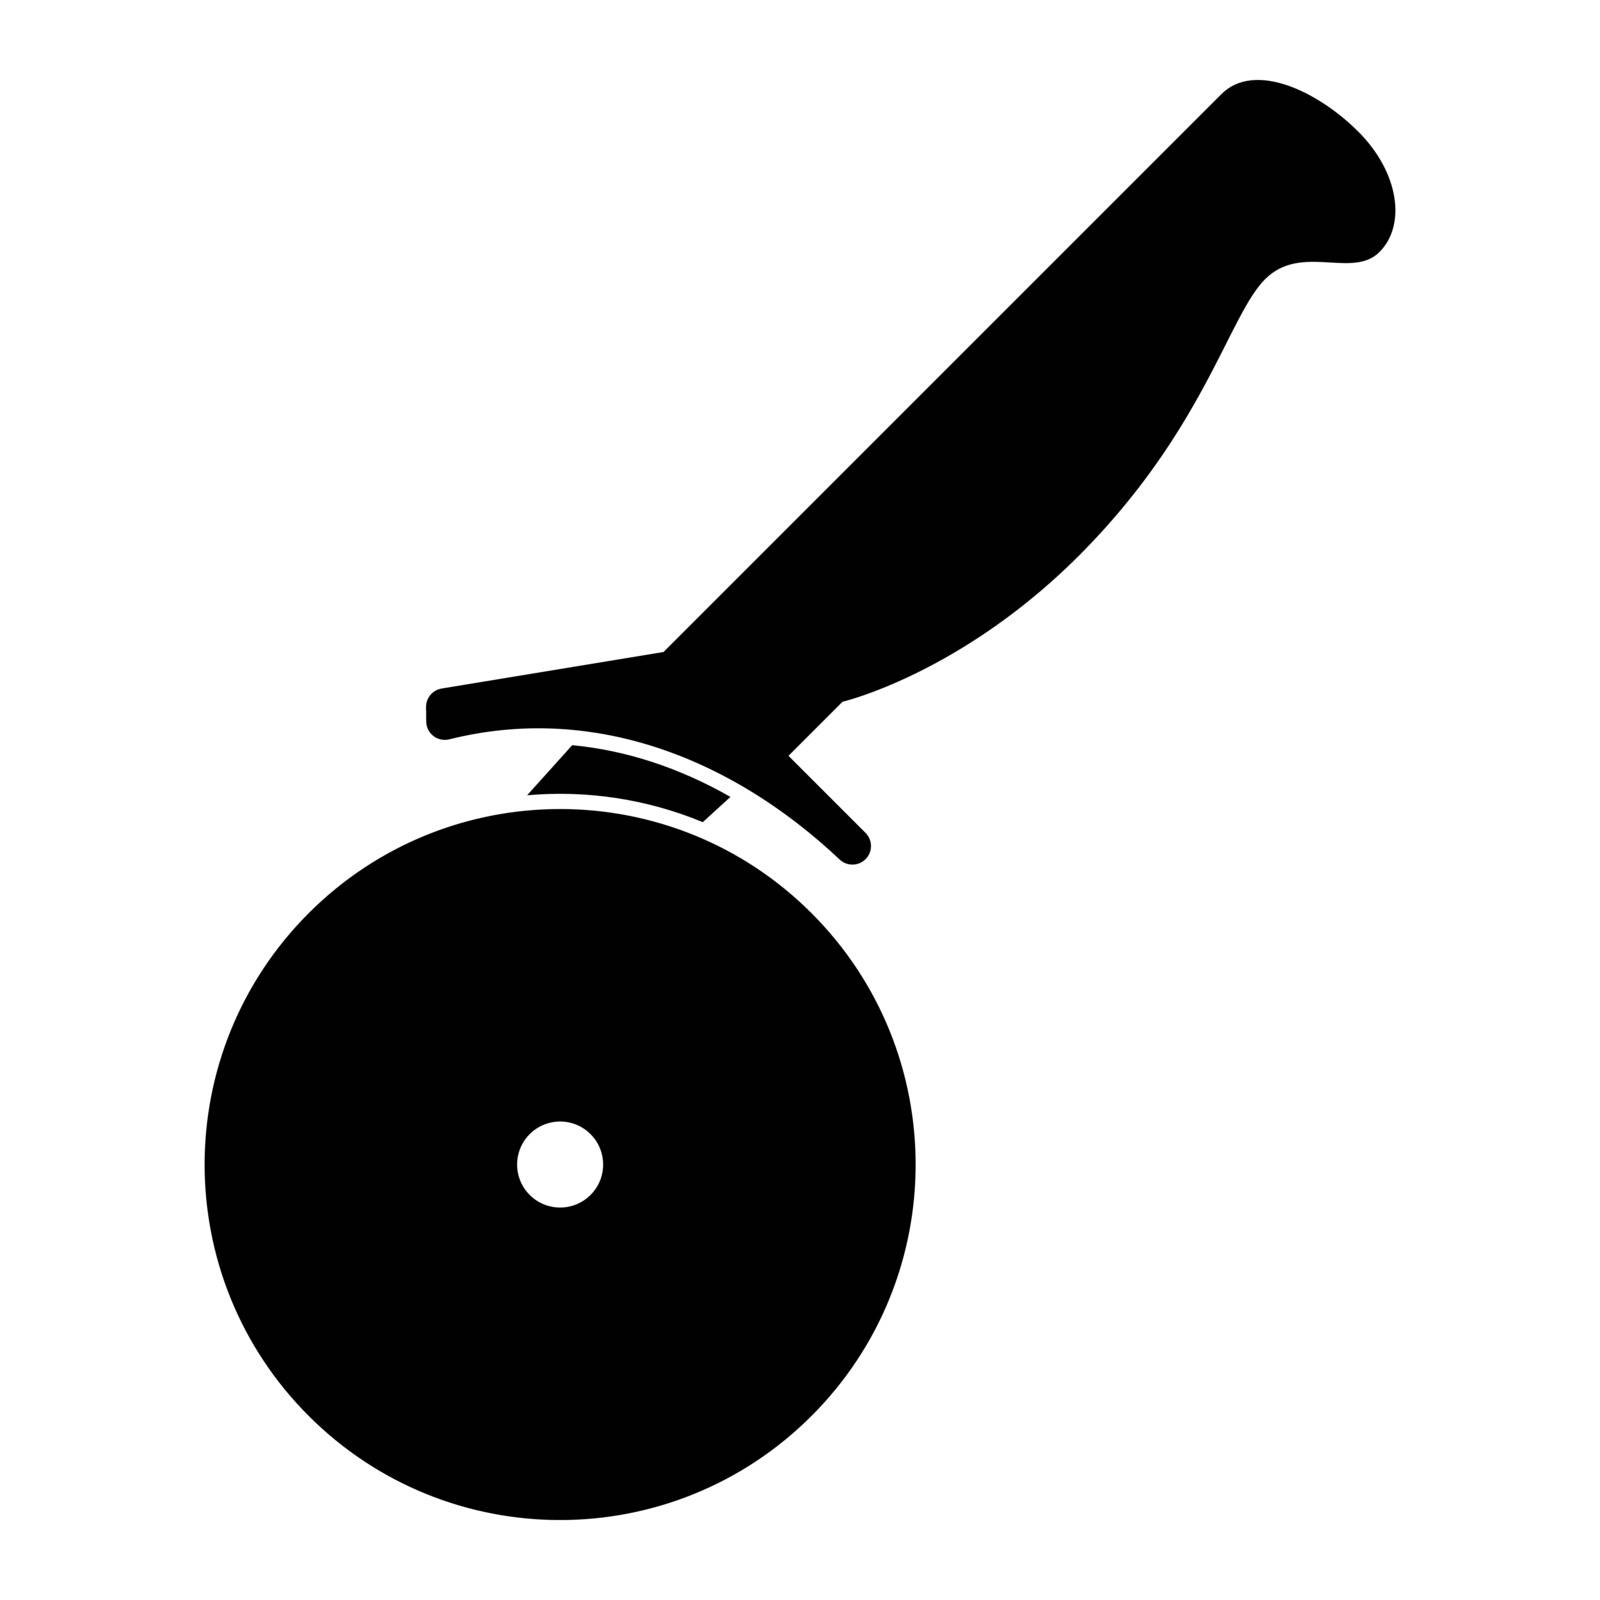 Pizza cutter ot pizza knife icon black color vector illustration flat style simple image